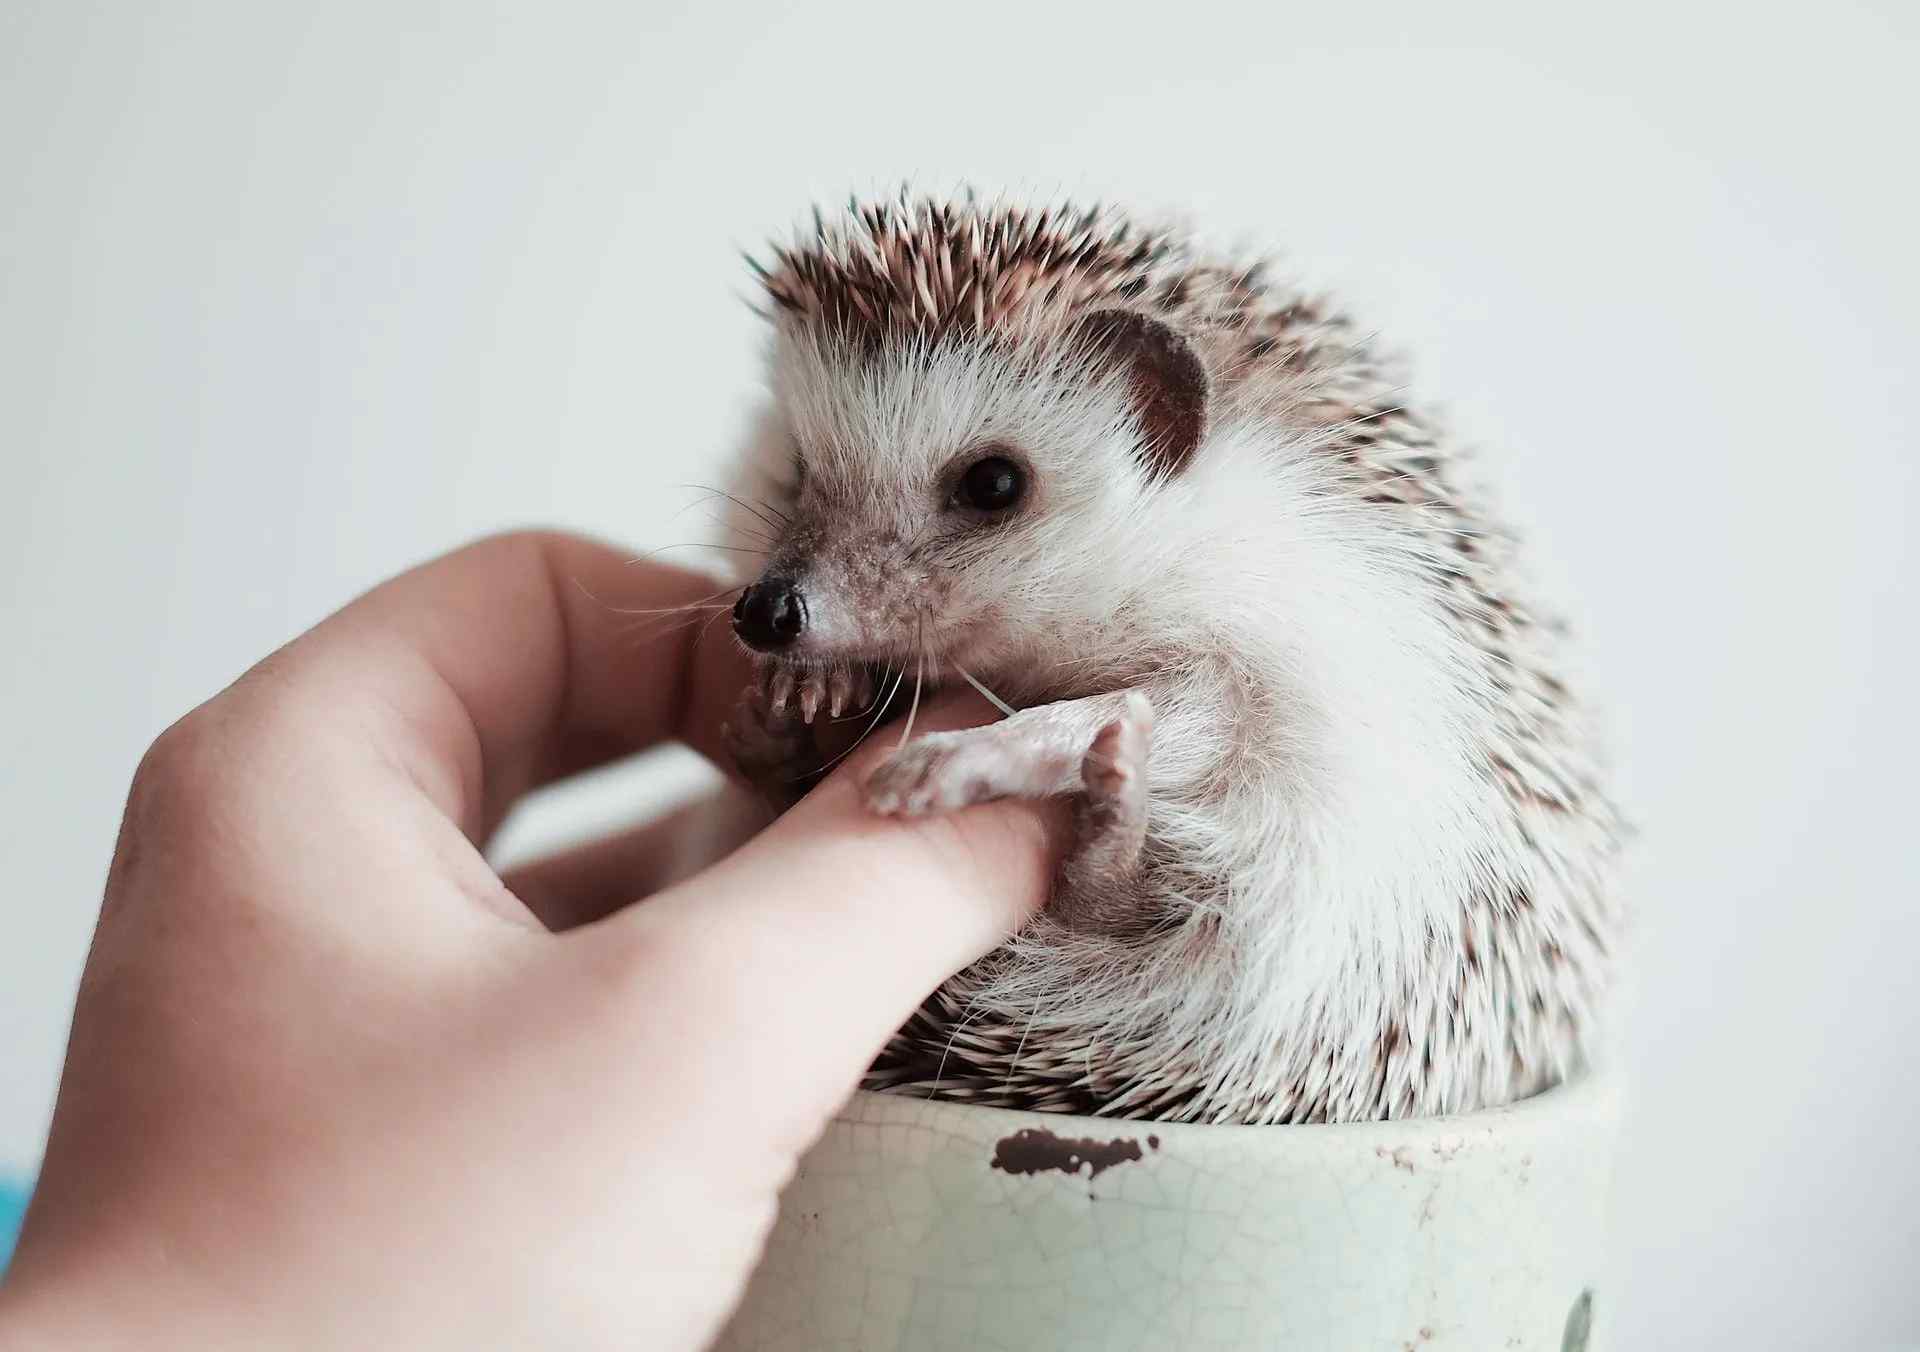 Hedgehogs are known to be excellent as pets. Get a prickly ball of cuteness if you don't have one already.